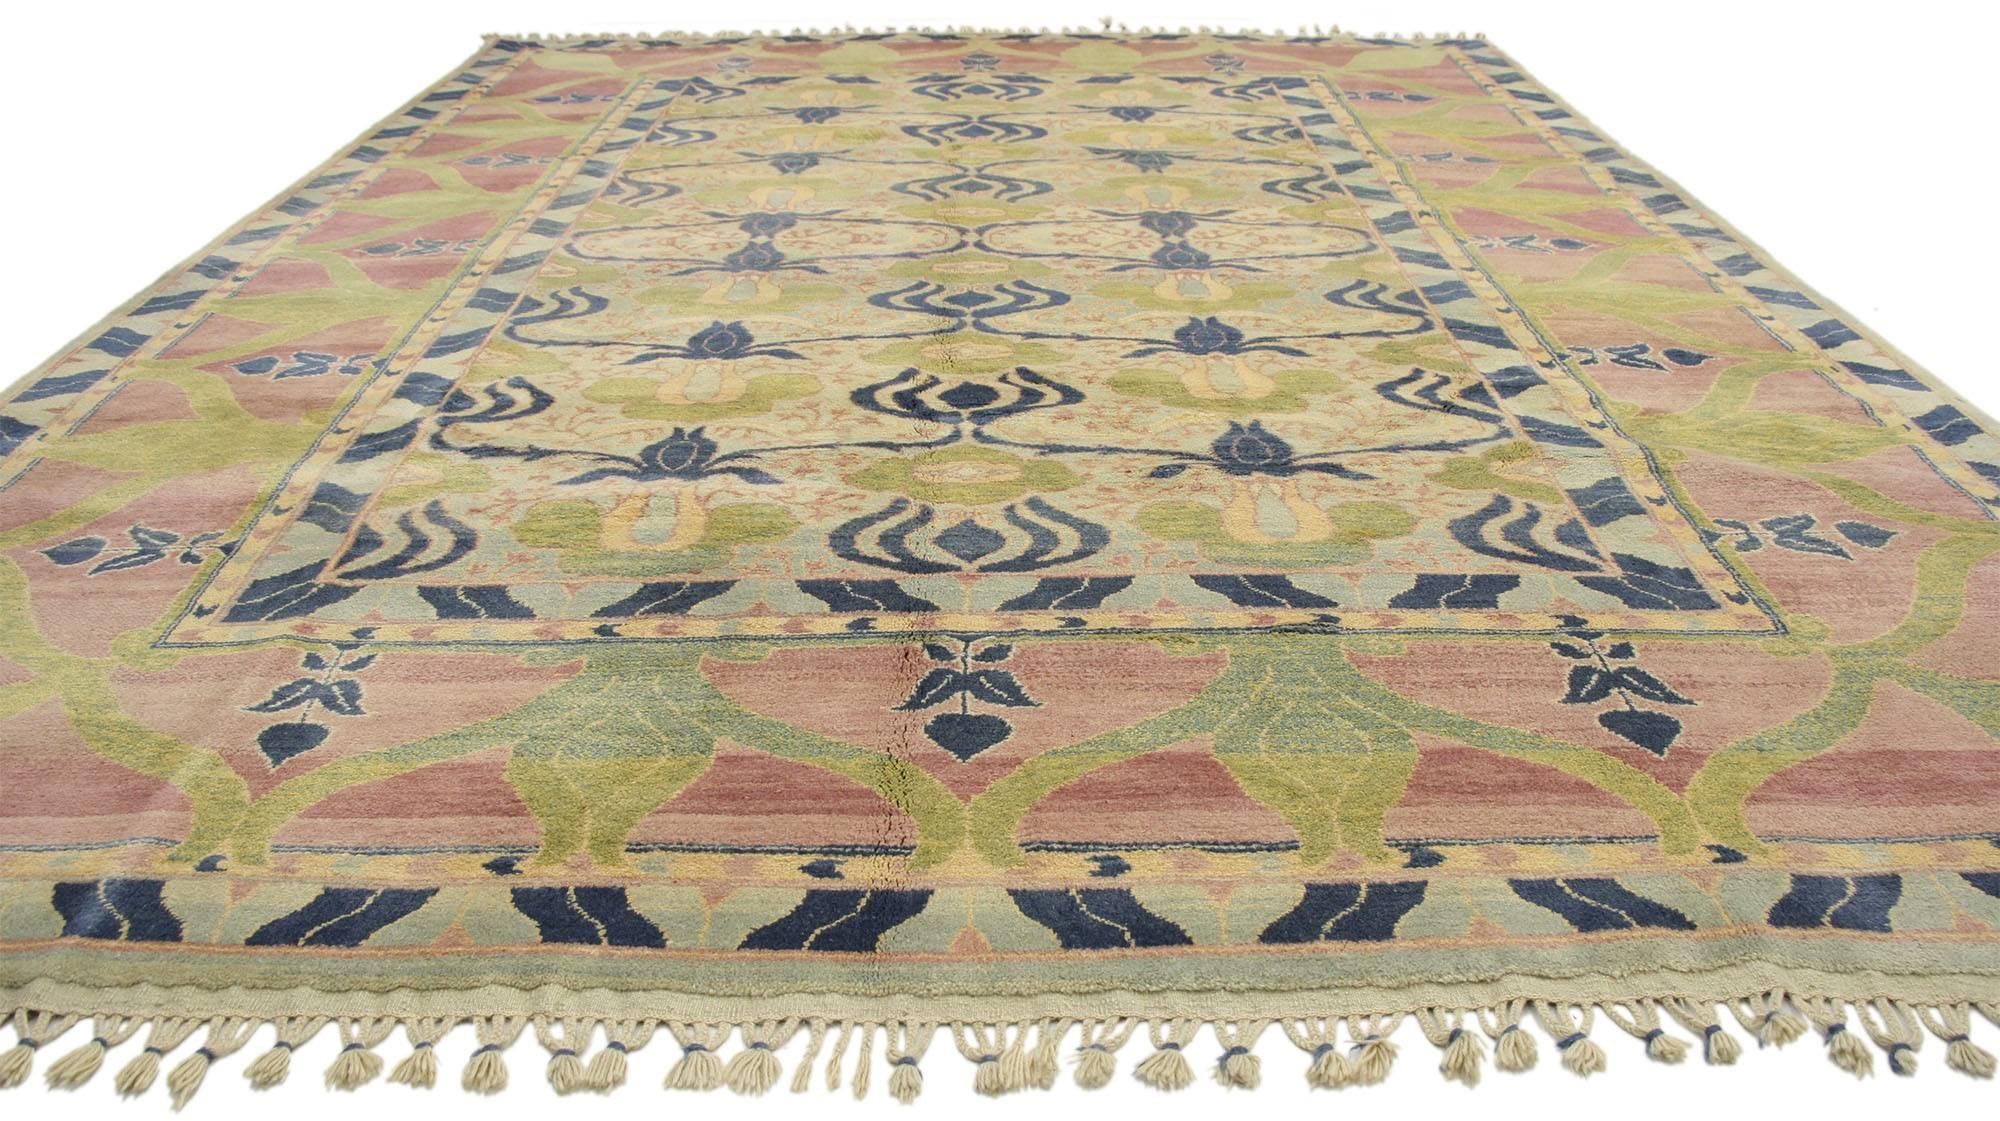 77112 Vintage Turkish Oushak William Morris Inspired Rug with Arts & Crafts Style 09’02 x 13’00. This hand-knotted wool vintage Turkish Oushak Anatolian rug features an all-over geometric pattern composed of a large scale repeating floral design